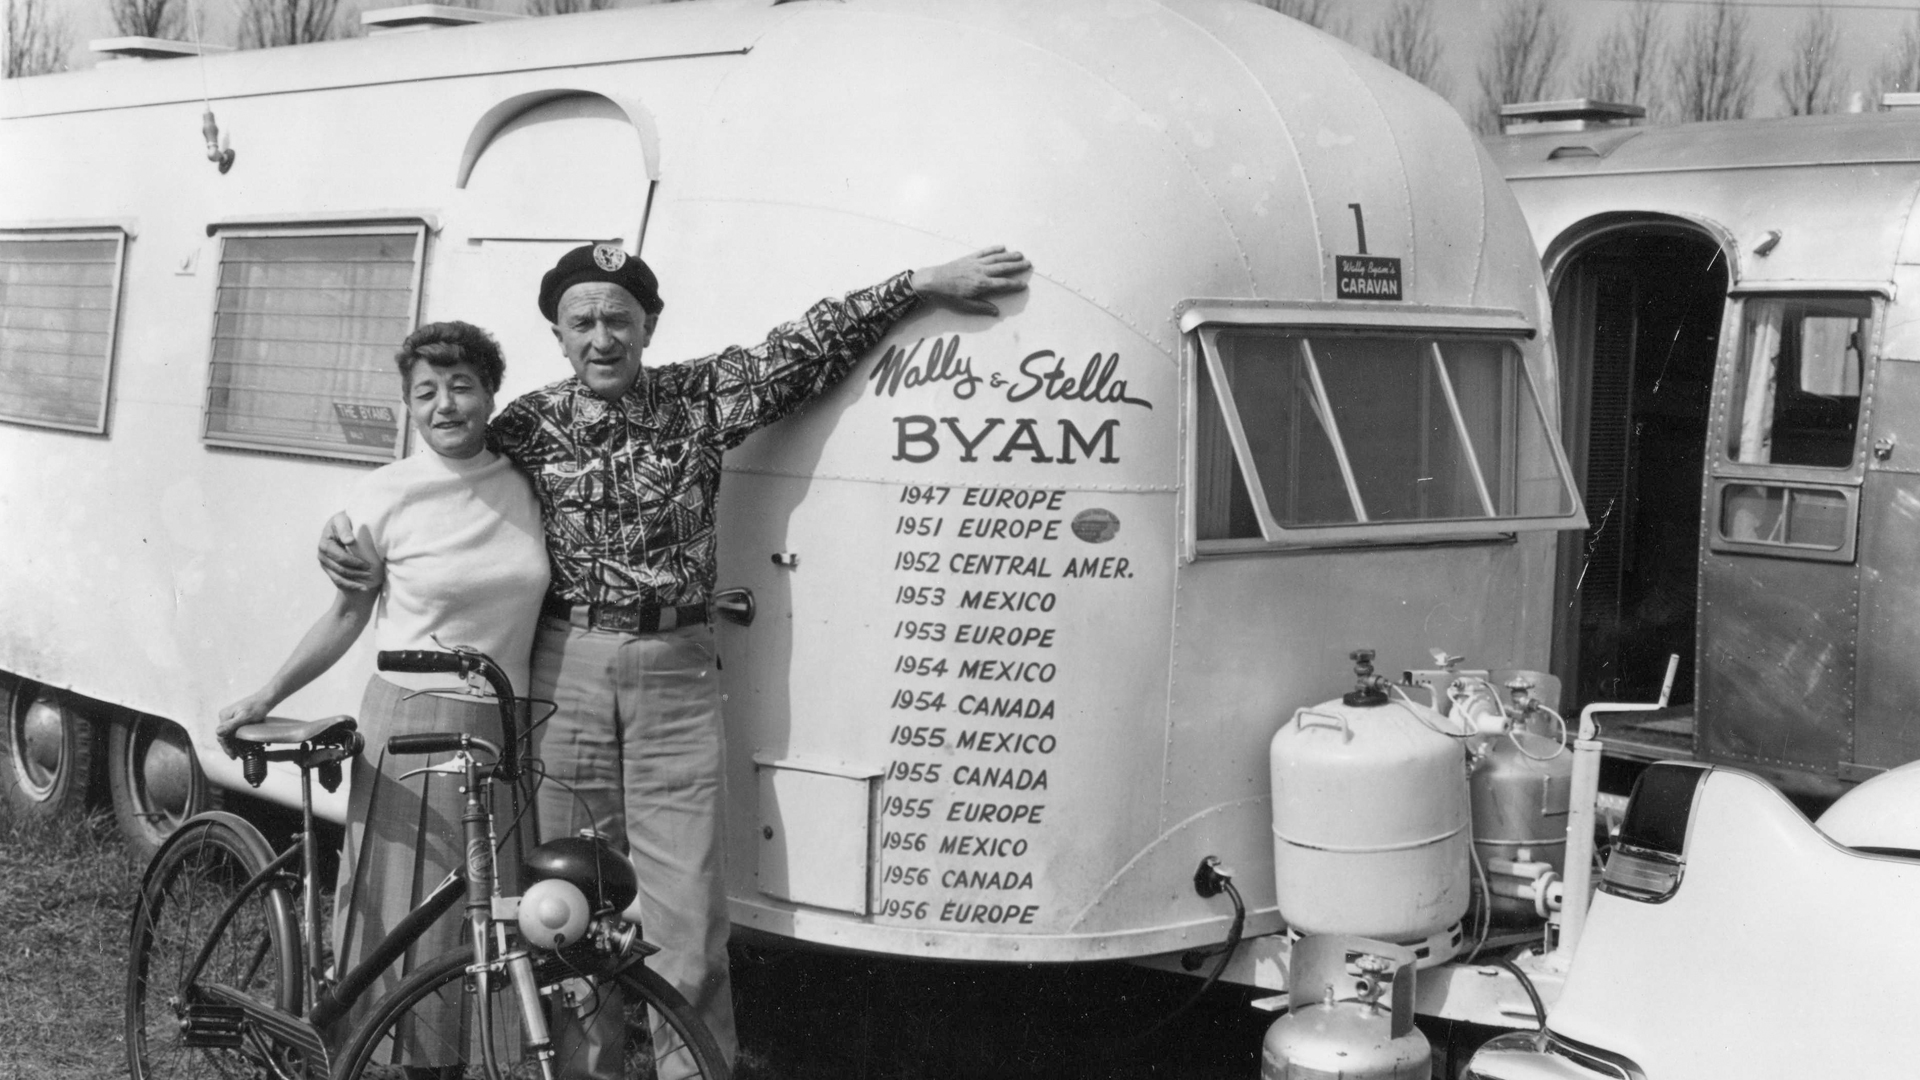 Airstream Founder, Wally Byam and his wife Stella, stand next to the White Trailer that was used to travel through Europe